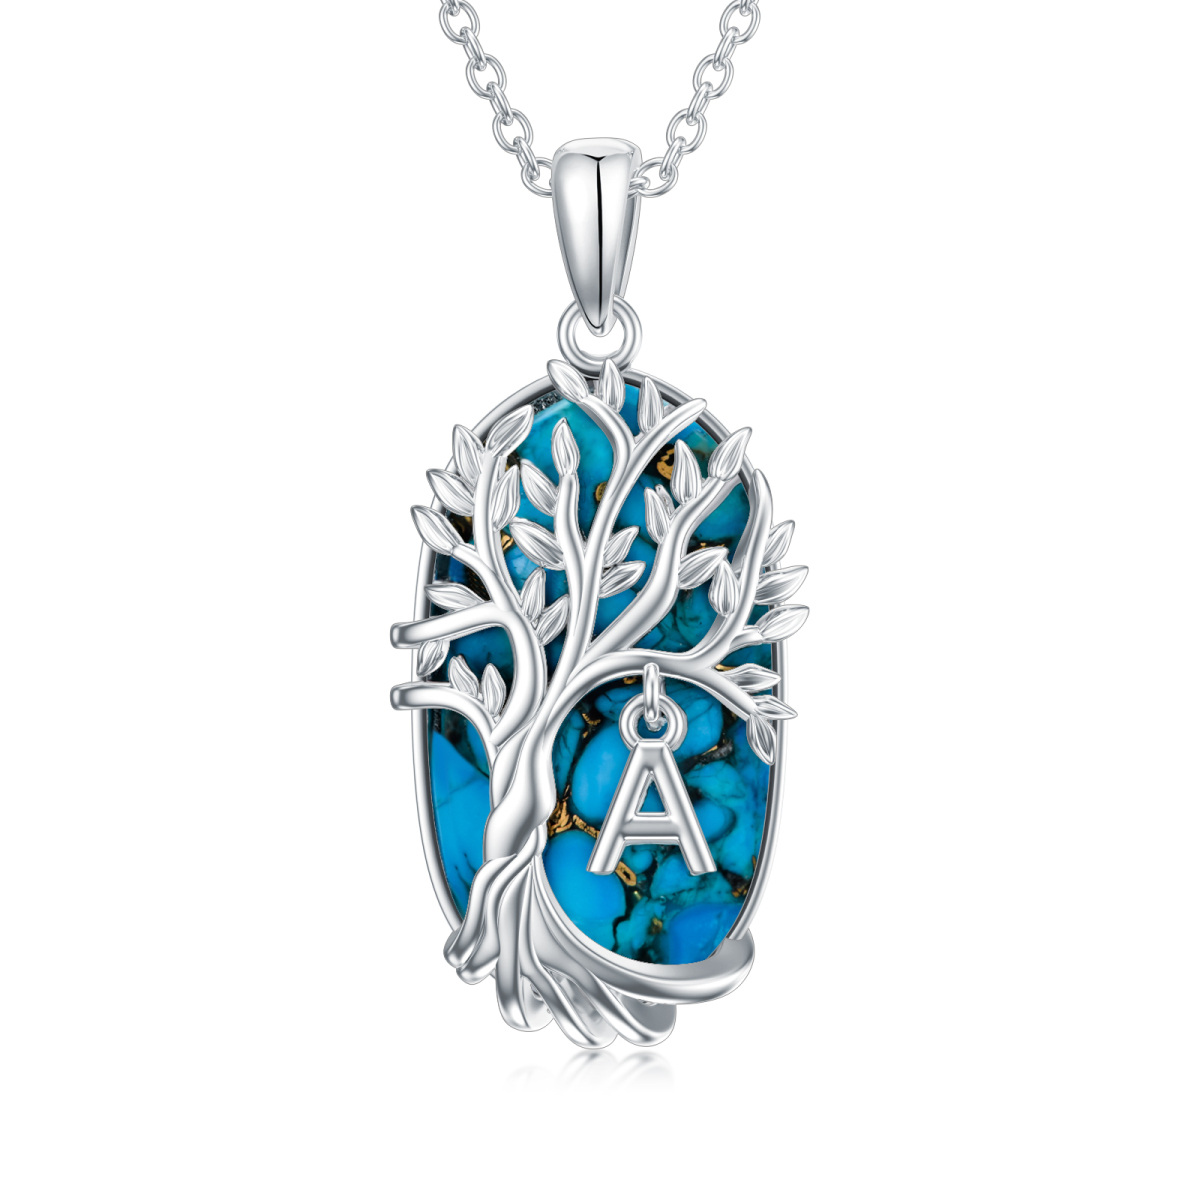 Sterling Silver Oval Shaped Turquoise Tree Of Life Pendant Necklace with Initial Letter A-1